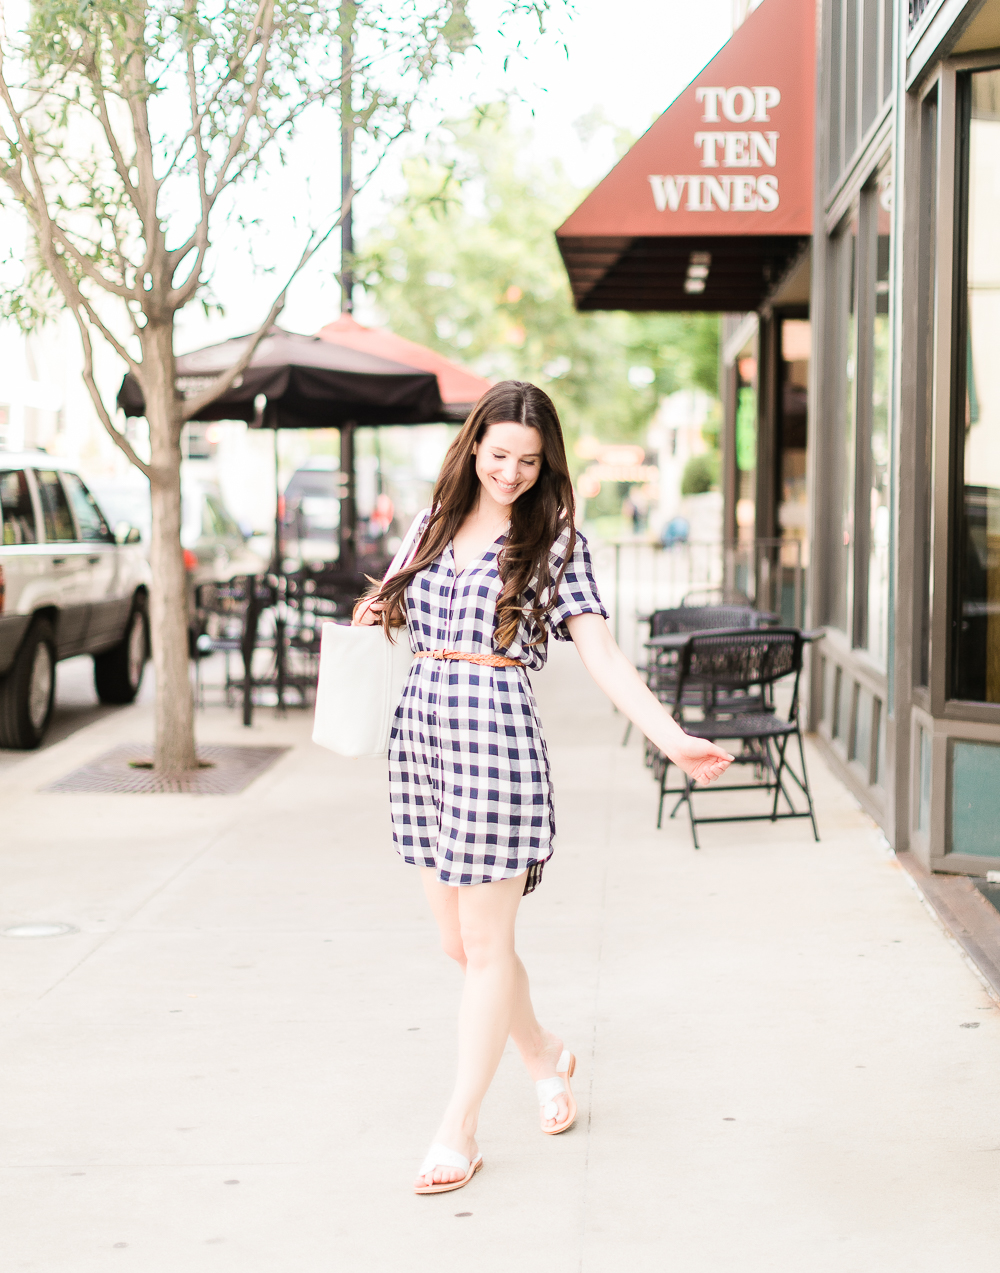 How to wear a plaid shirtdress in the summer by southern fashion blogger Stephanie Ziajka from Diary of a Debutante, how to wear plaid shirtdress, plaid shirt dress outfit, style plaid, BB Dakota Cicely Shirtdress styled with white Jack Rogers sandals, a white Vera Bradley Mallory tote, skinny braided leather belt, and large pearl stud earrings